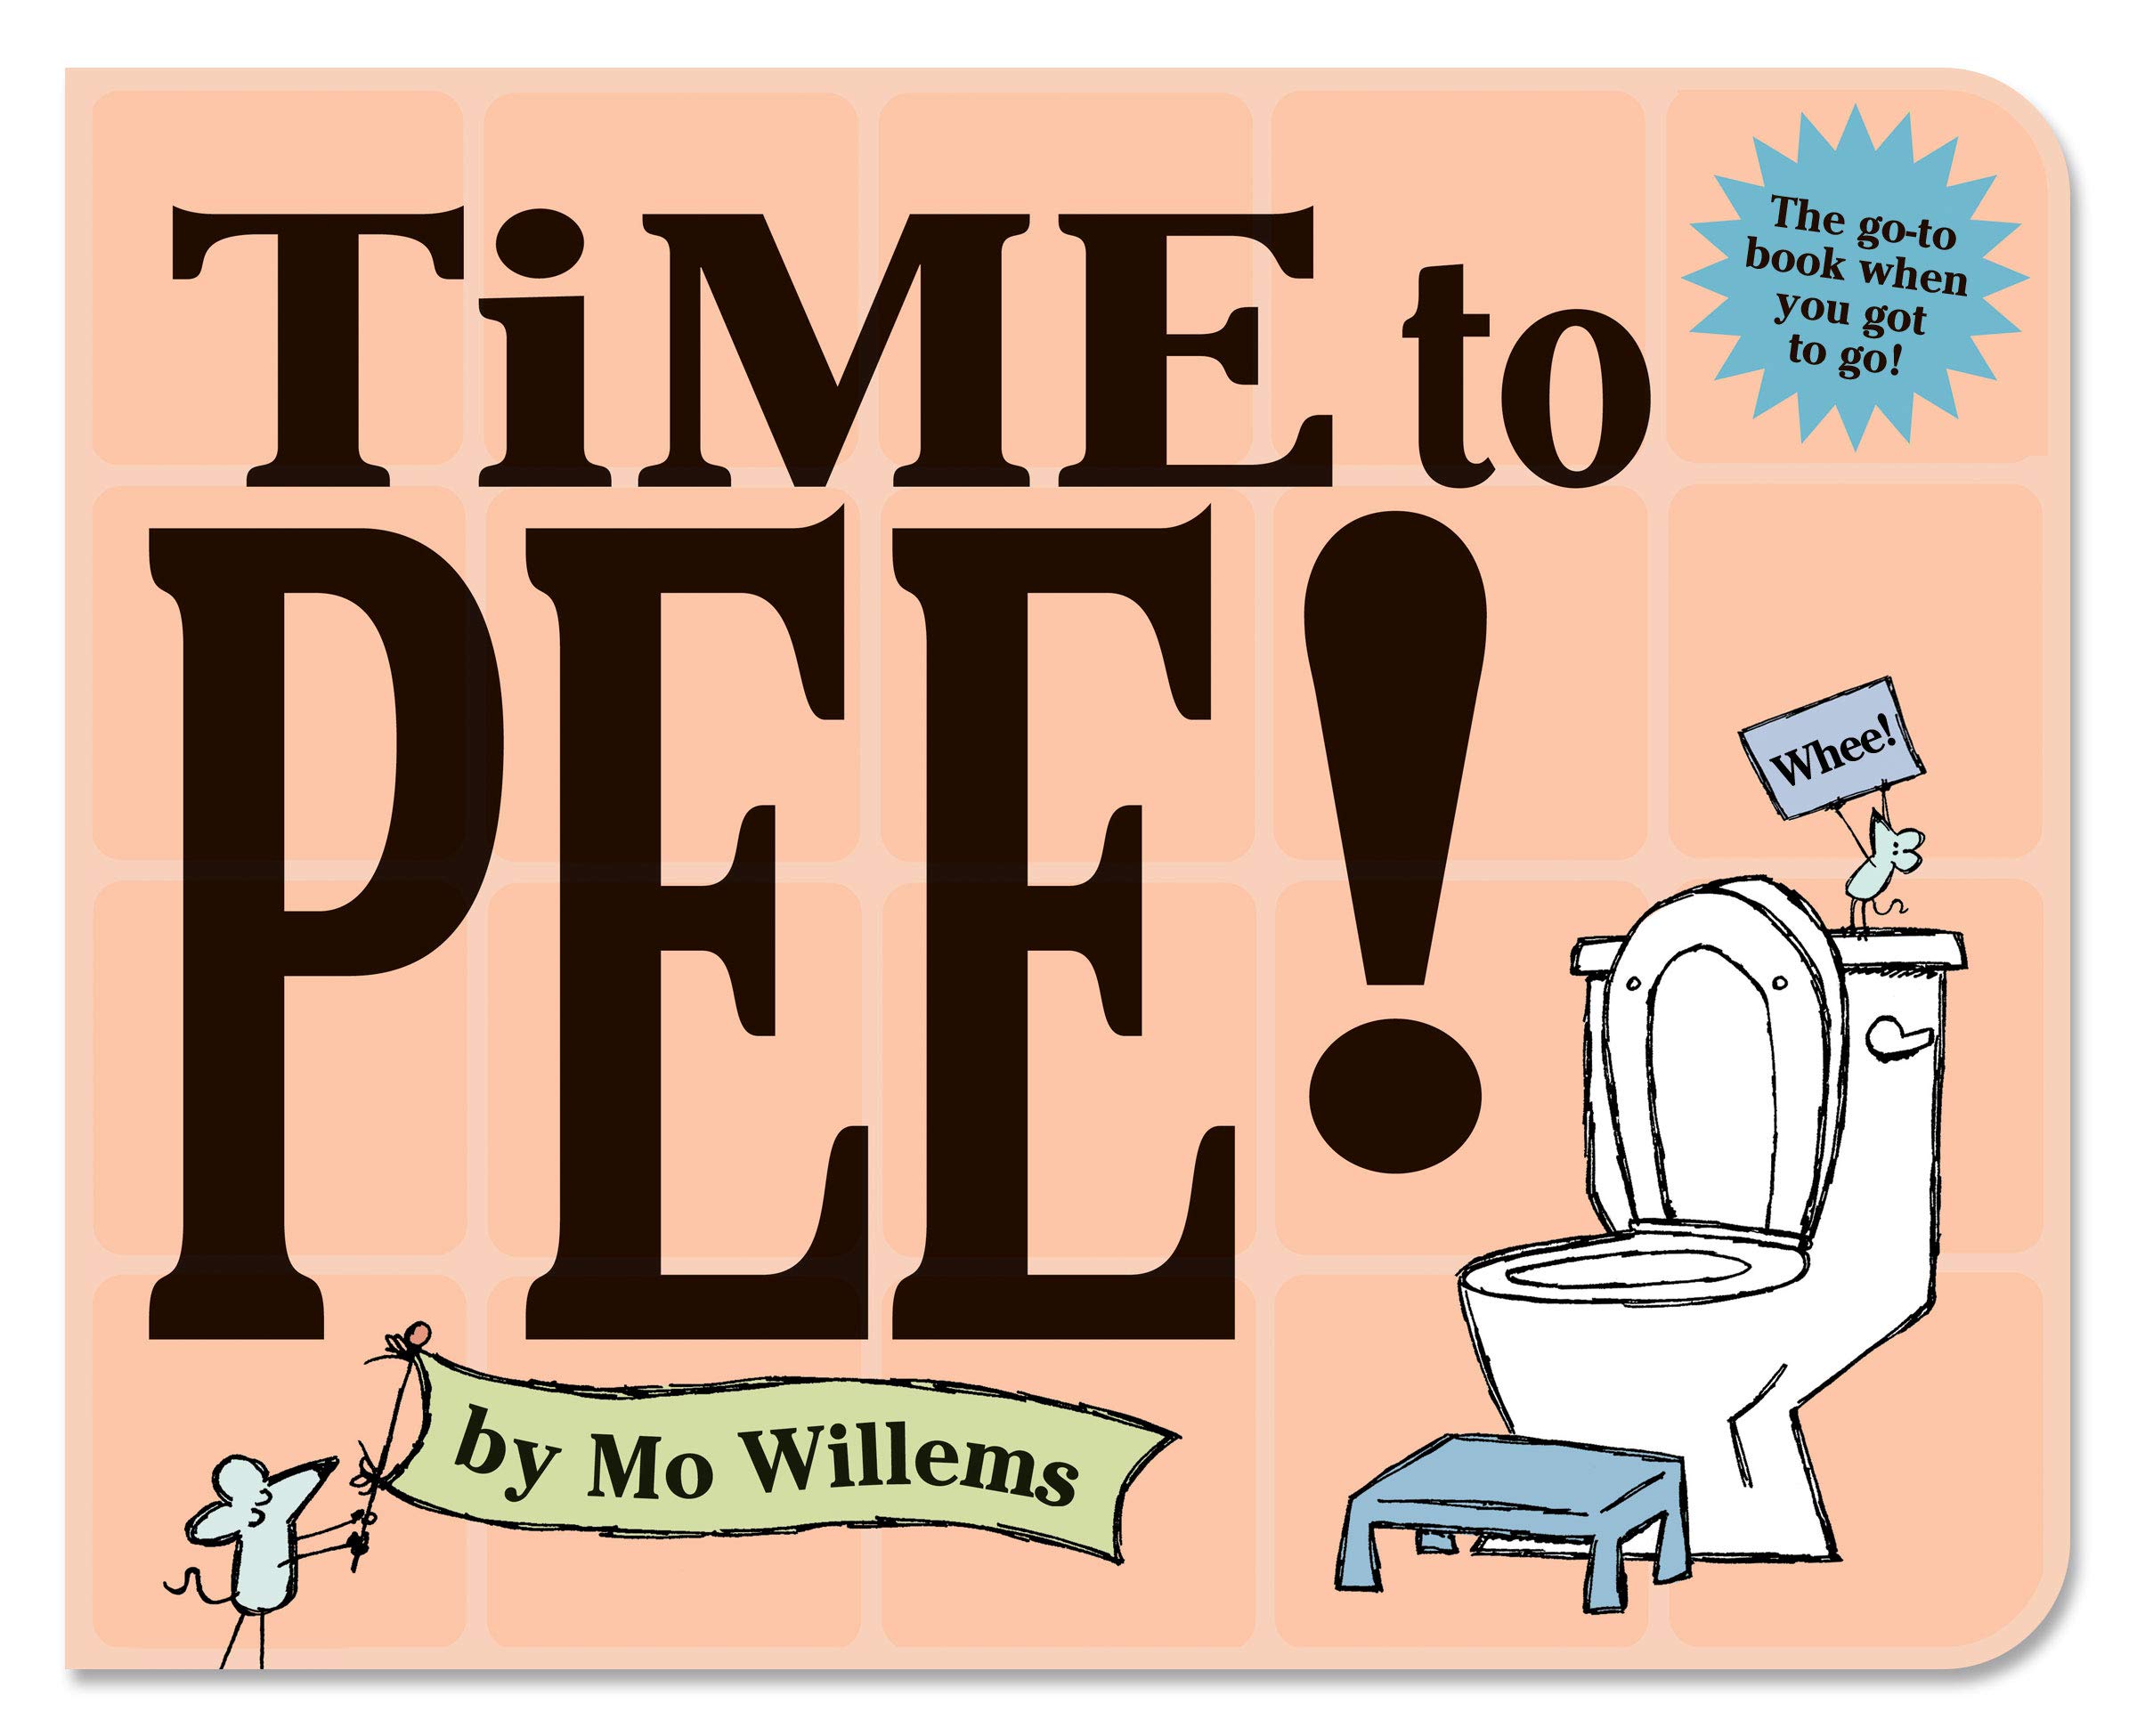 front cover of the book 'time to pee!', a potty training book for toddlers